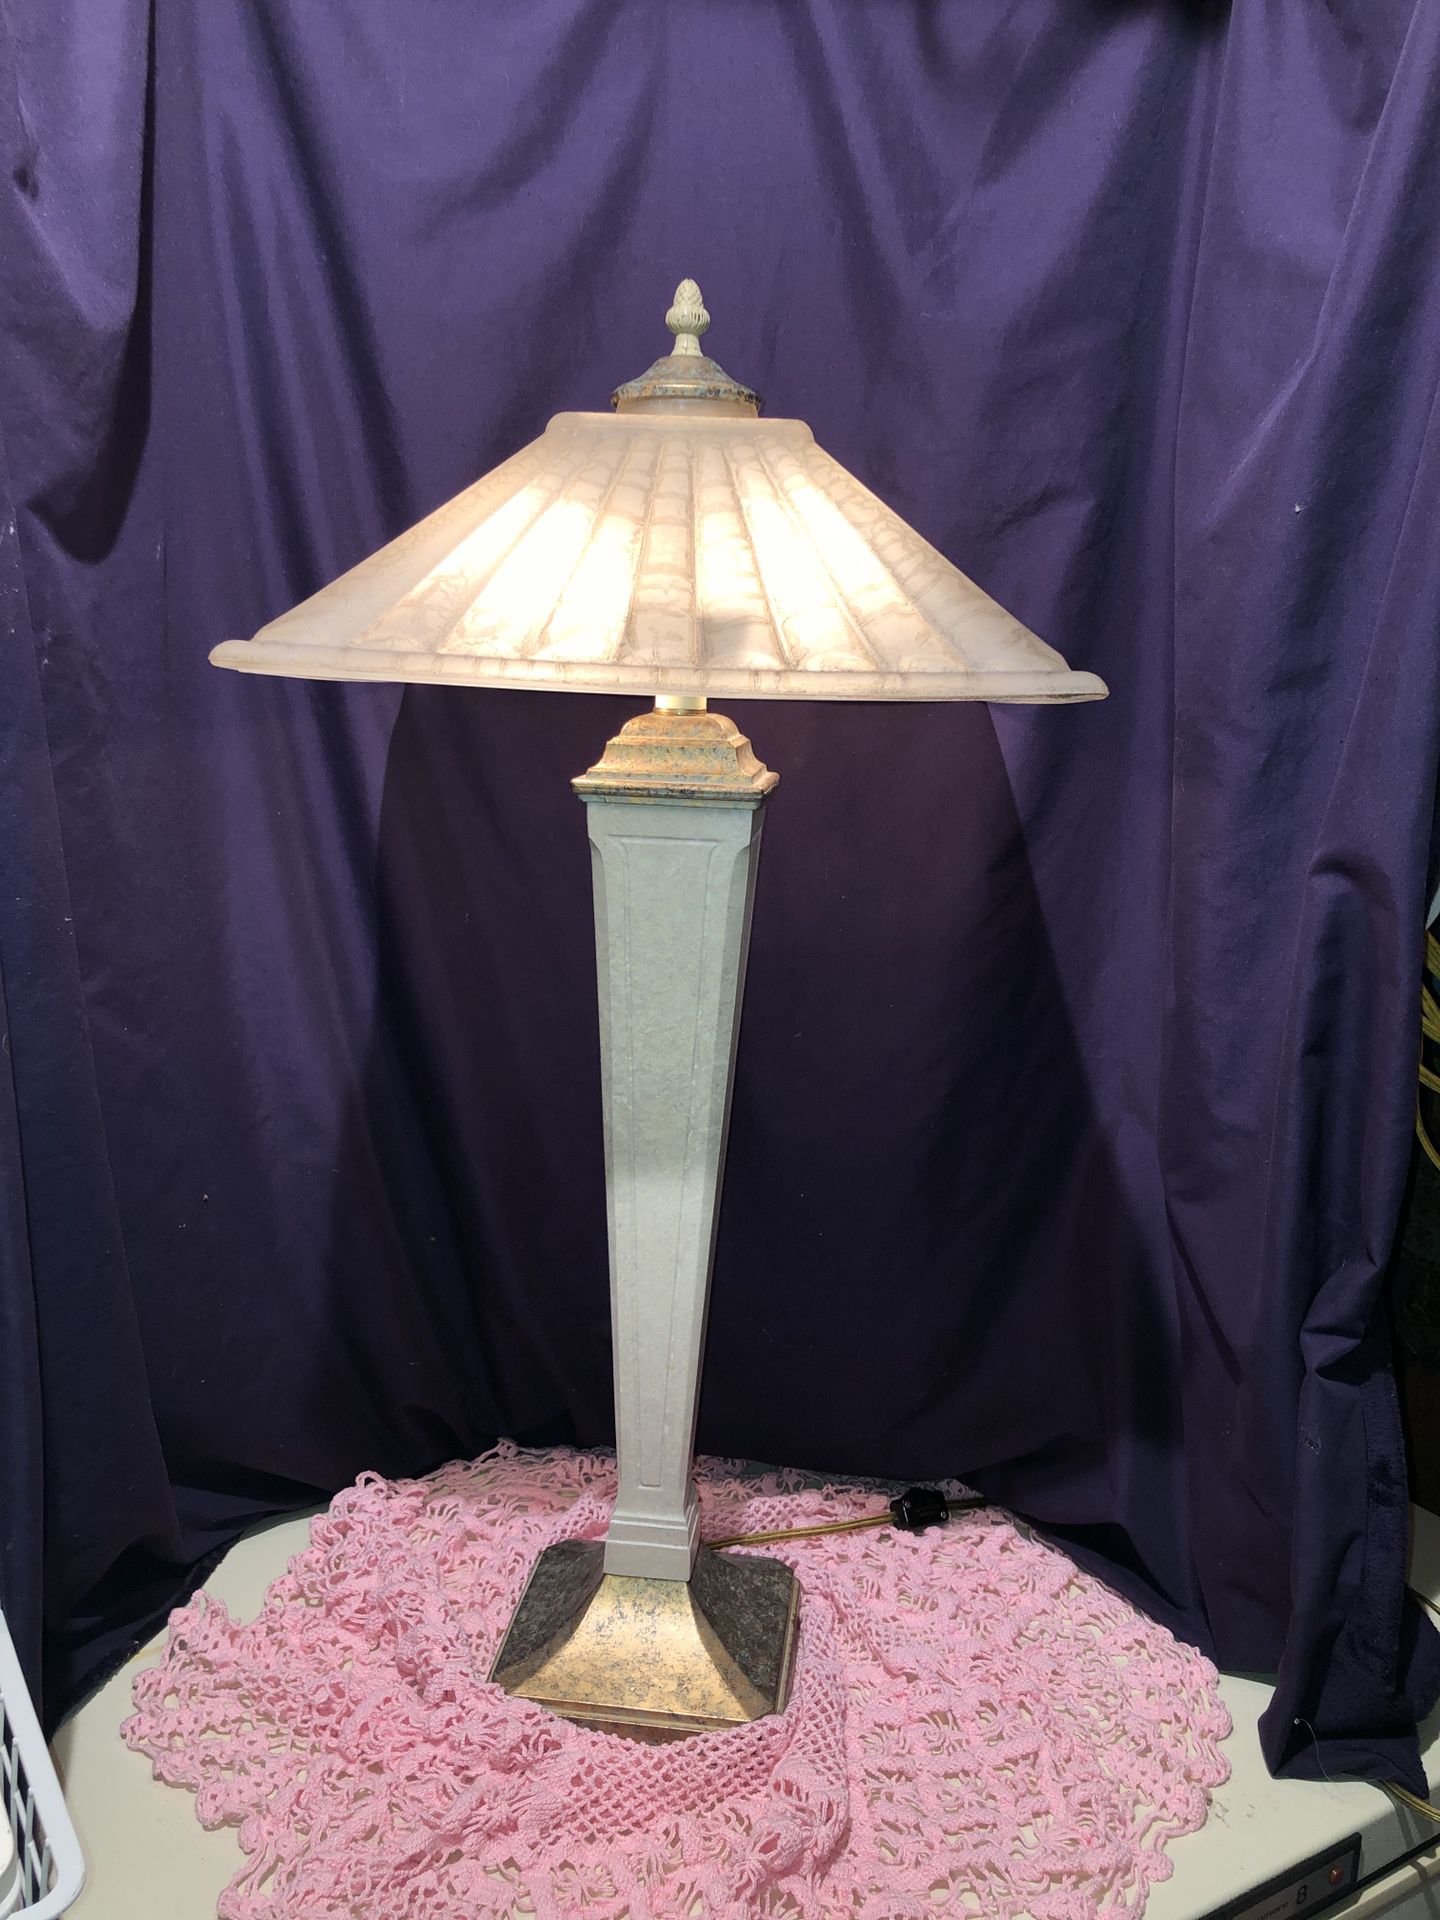 Missionary style lamp